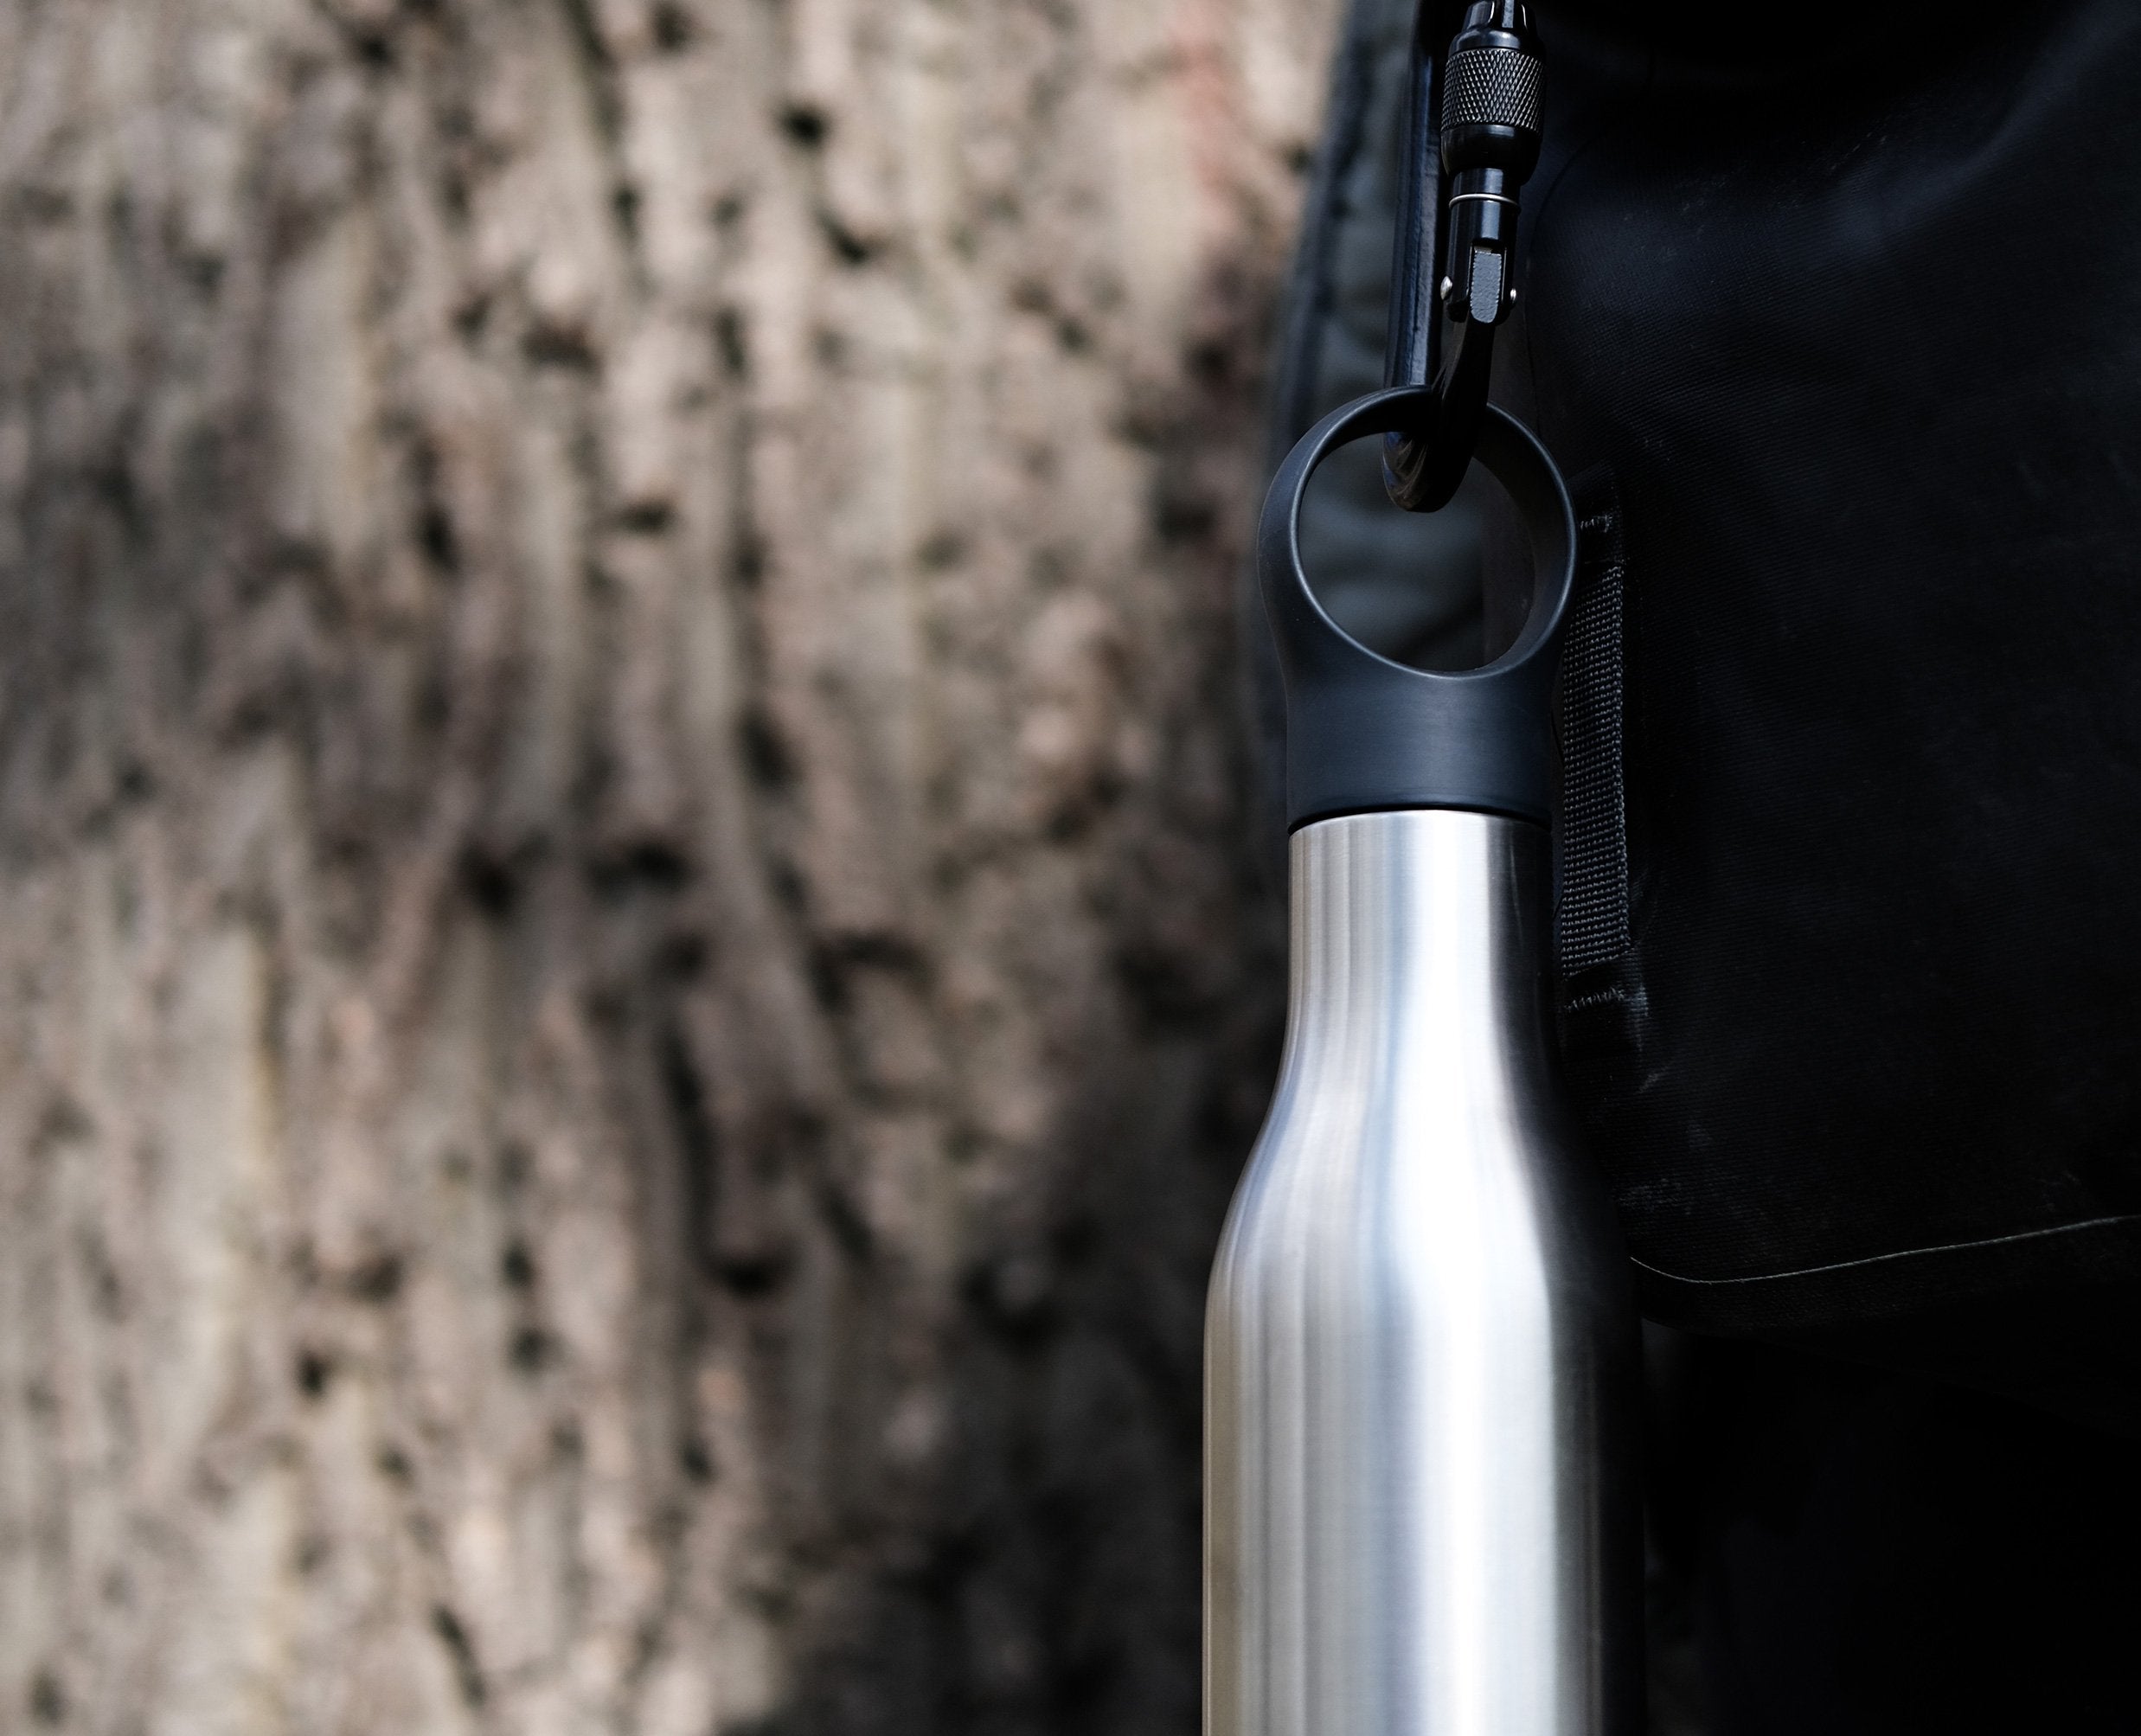 BEON.COM.AU Product Details The clever design of this water bottle keeps drinks hot for up to 12 hours, cold for up to 24 hours and remains condensation-free in your bag thanks to the double-walled, vacuum-insulated 18/8 stainless steel with a heat-reflecting copper layer.  Lid stores neatly on neck of bottl... Joseph Joseph at BEON.COM.AU